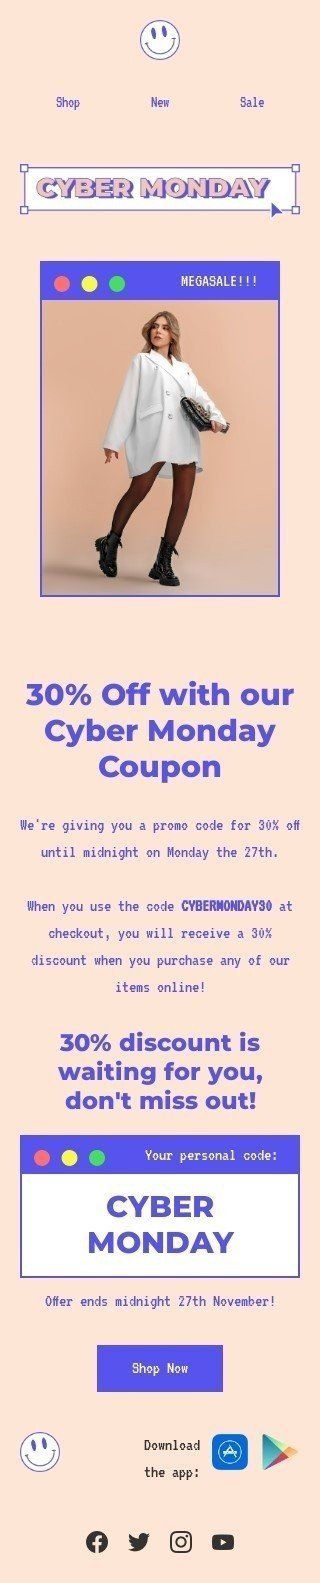 Cyber Monday email template "Our Cyber Monday coupon" for fashion industry mobile view